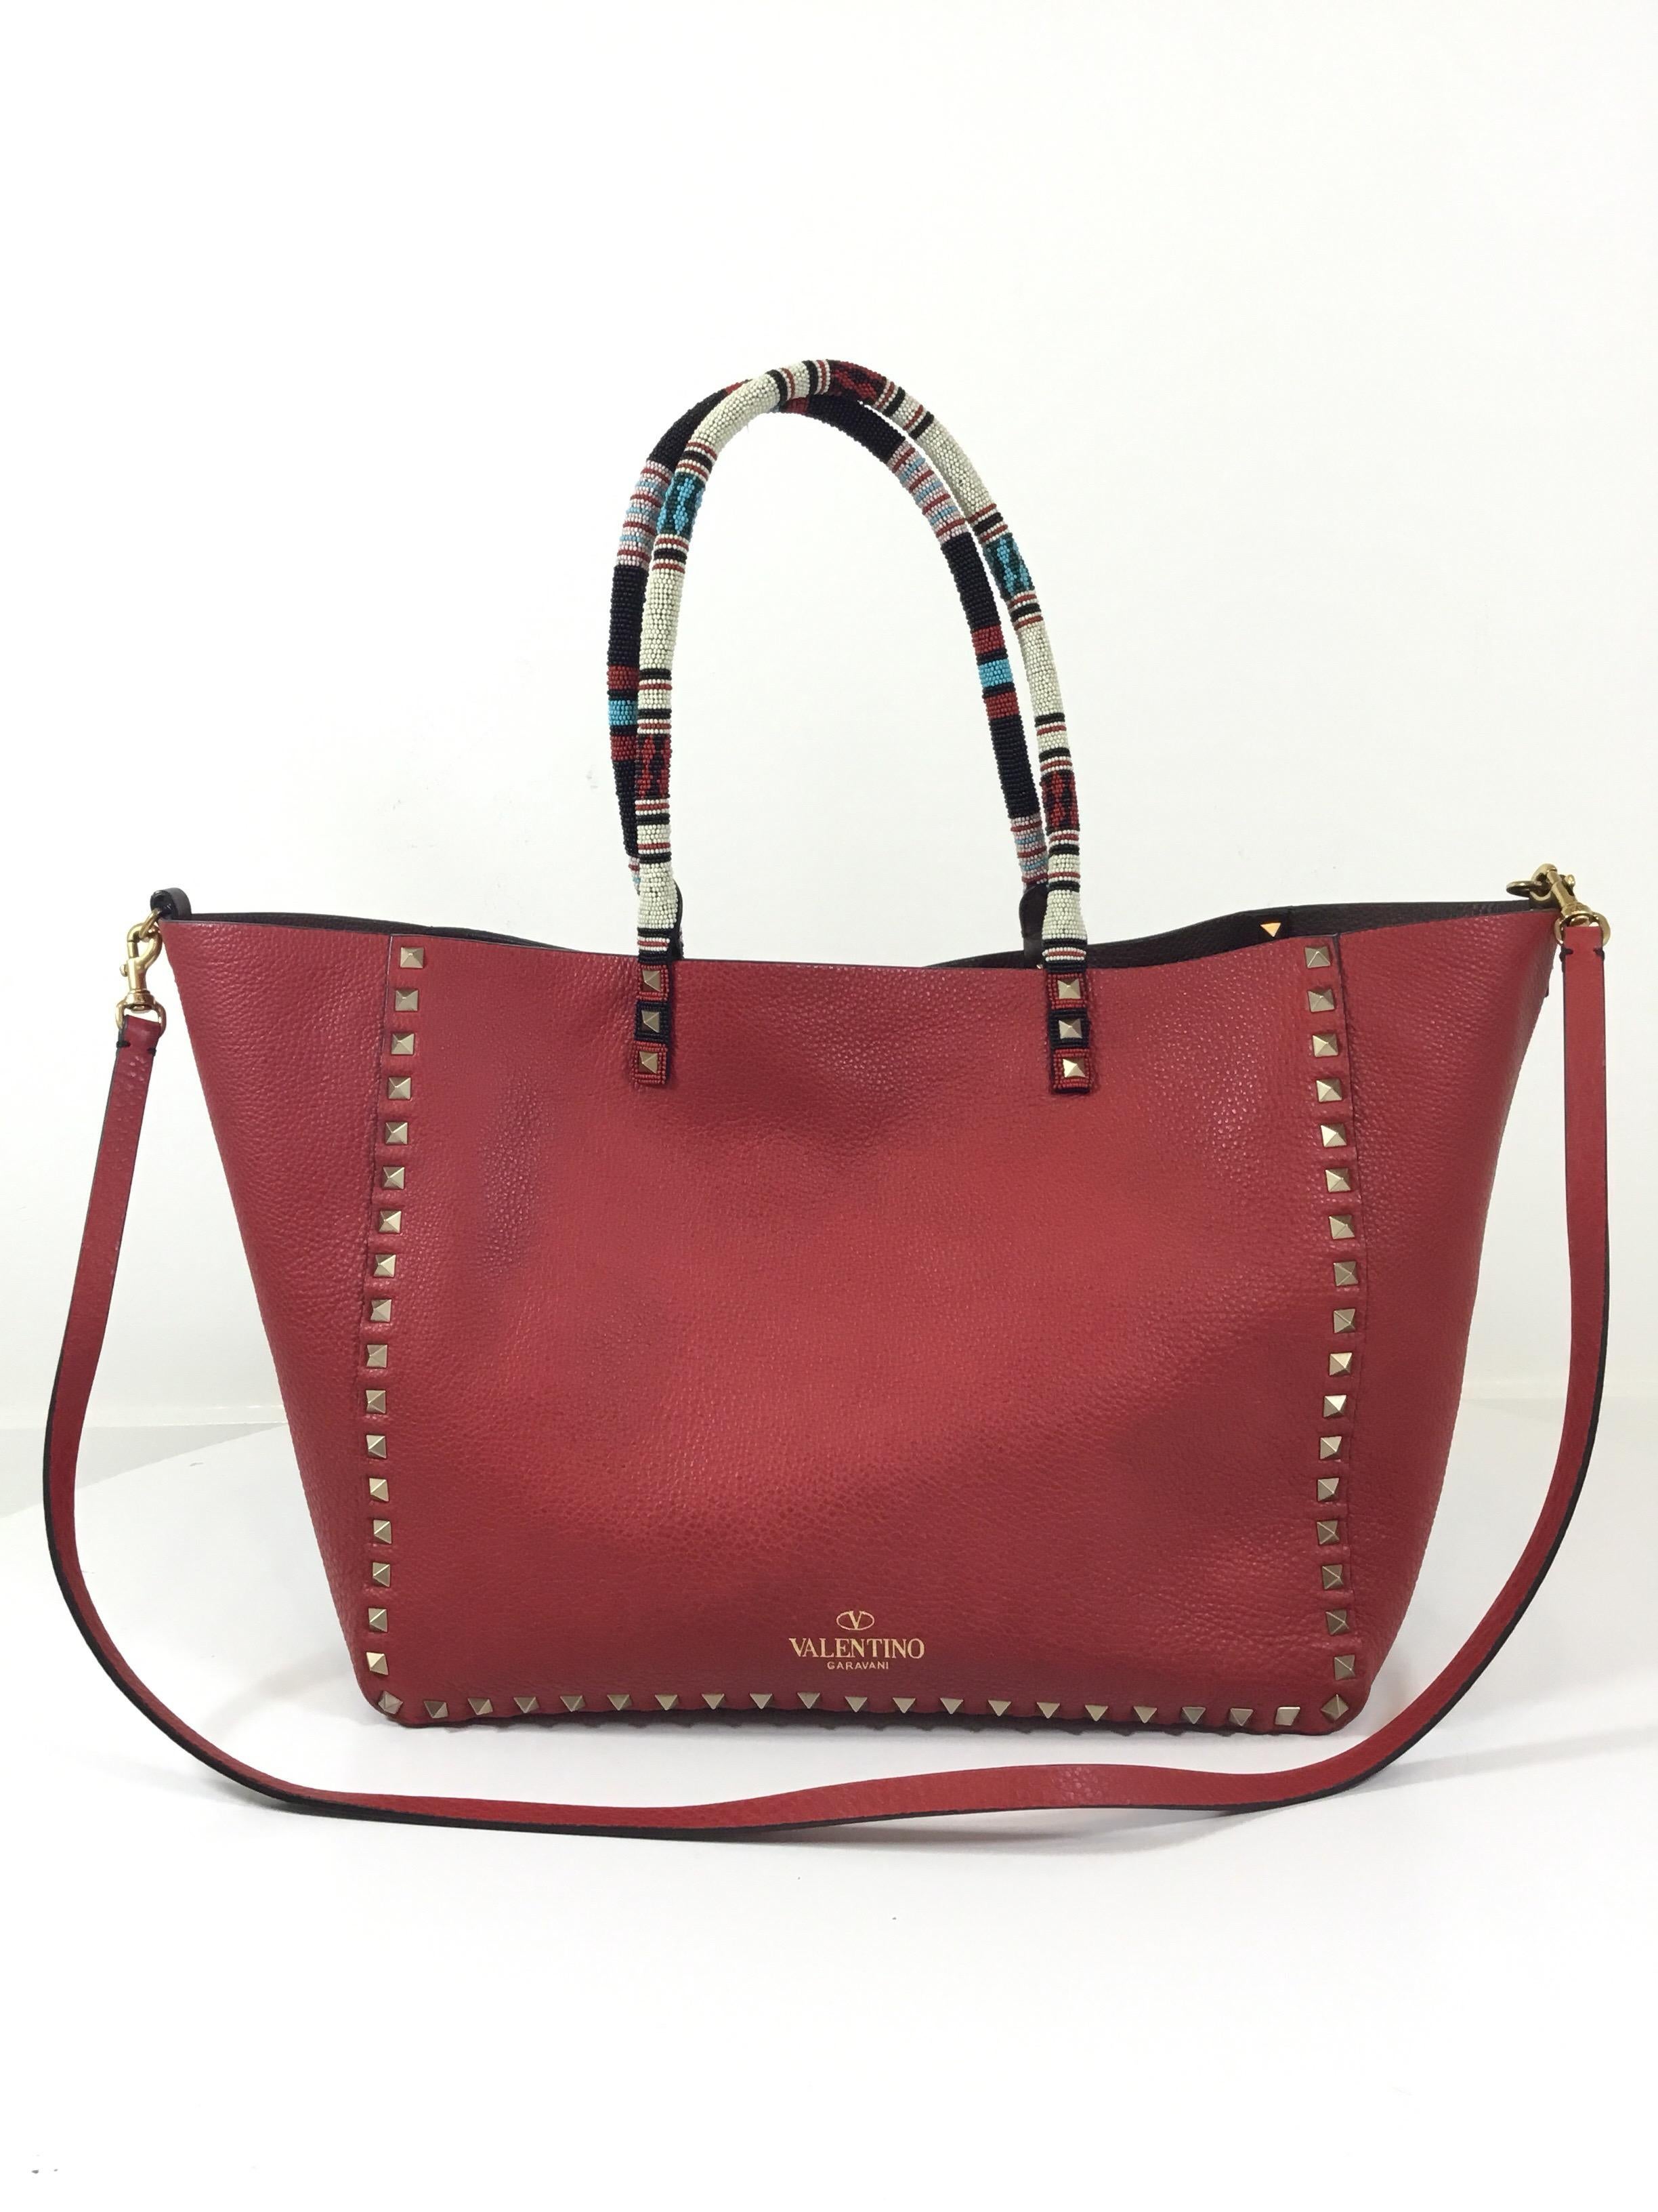 Valentino leather tote for Spring/Summer 2016 Collection inspired by African culture. Tote is featured in medium and is reversible in red and brown with signature rockstud applique along the trim, and fully beaded handles. Tote also includes a long